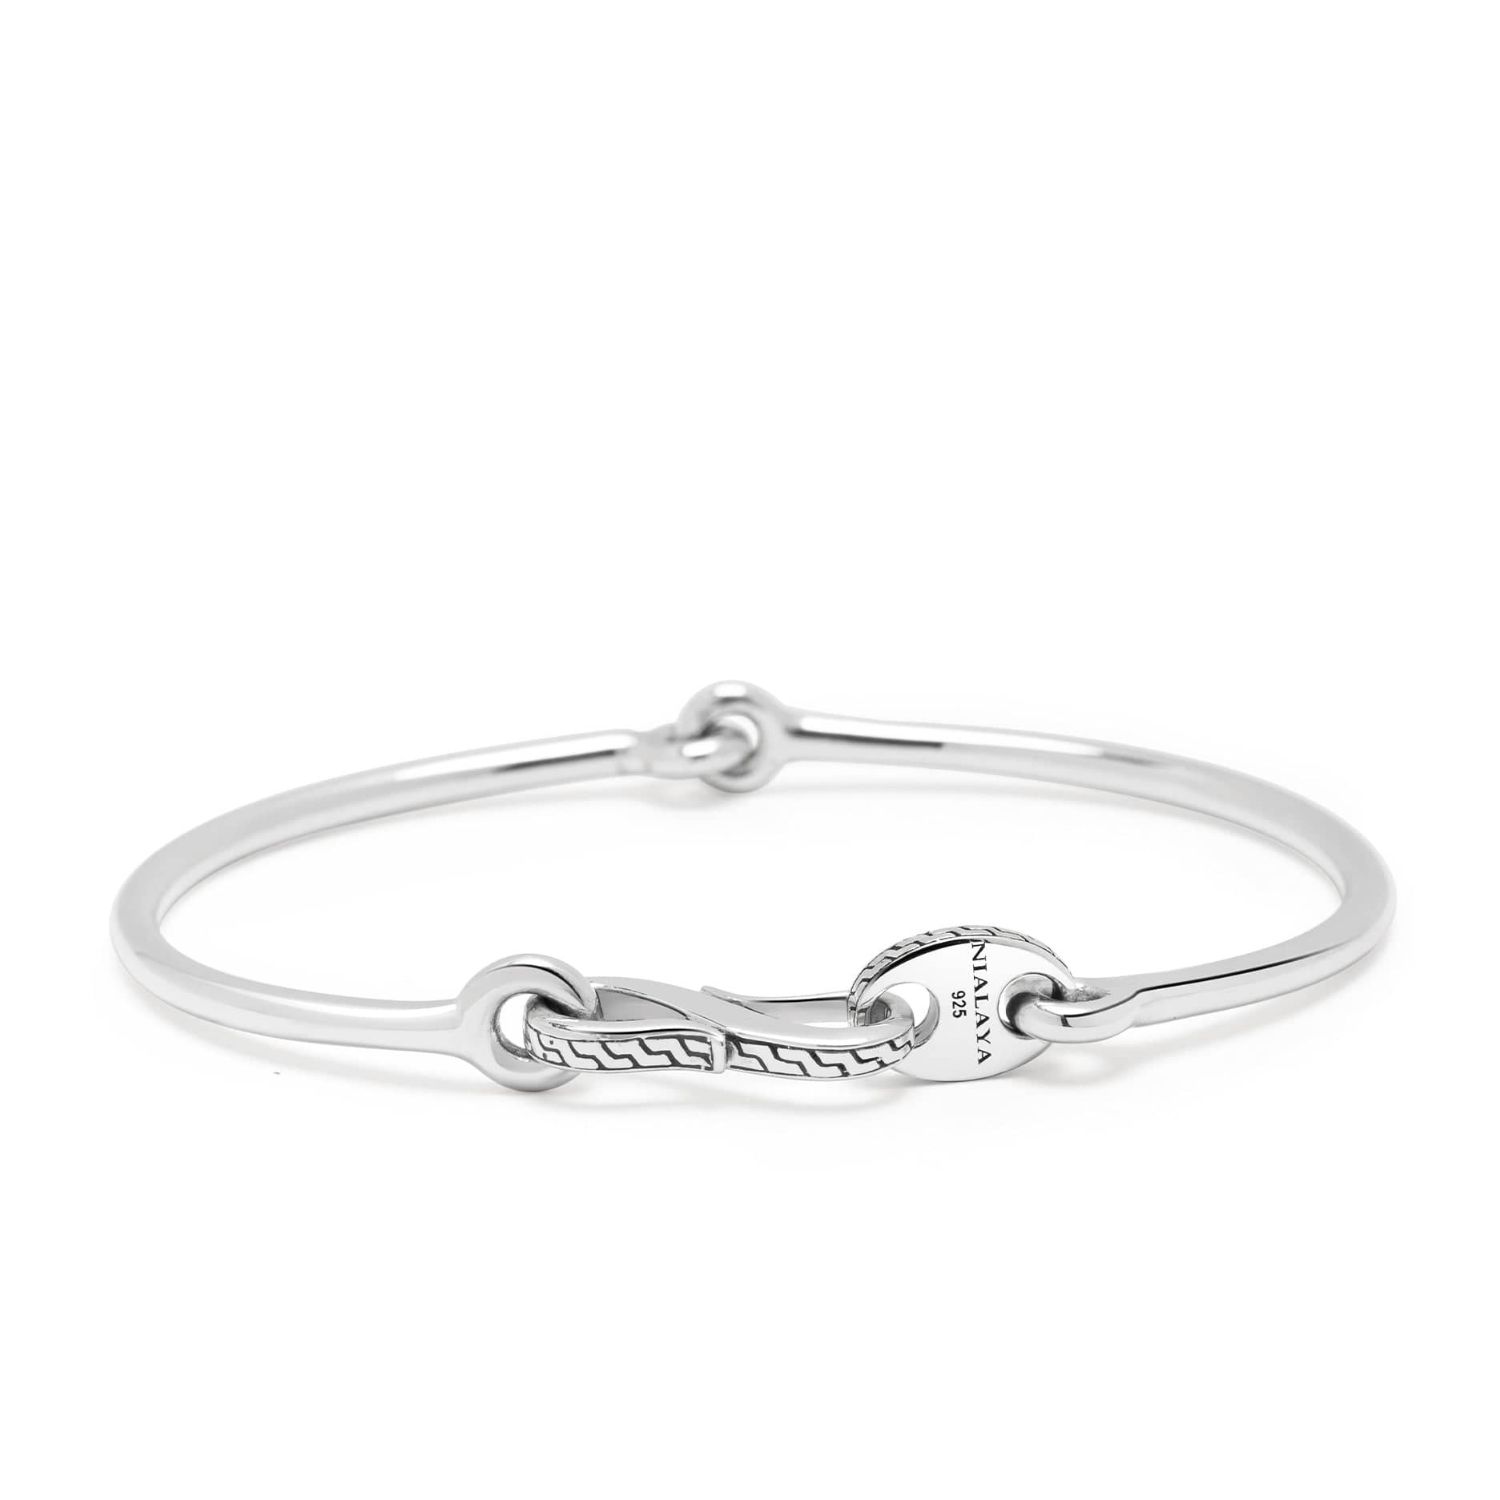 Nialaya Men's Delicate Sterling Silver Bangle With Hook Clasp In Black